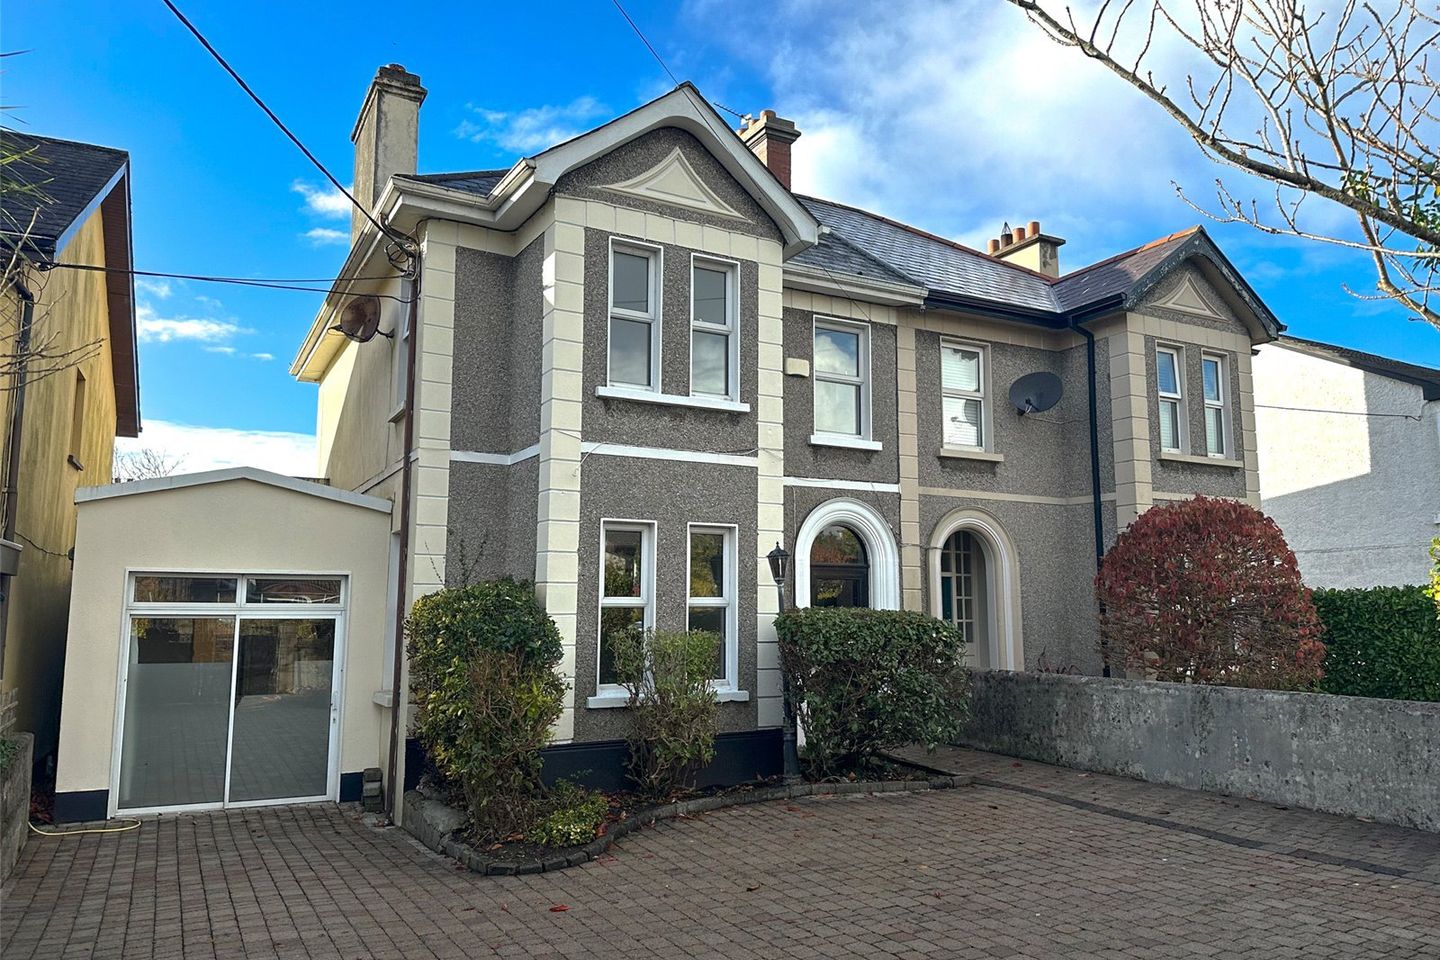 23 Lower Newcastle Road, Newcastle, Co. Galway, H91FND9